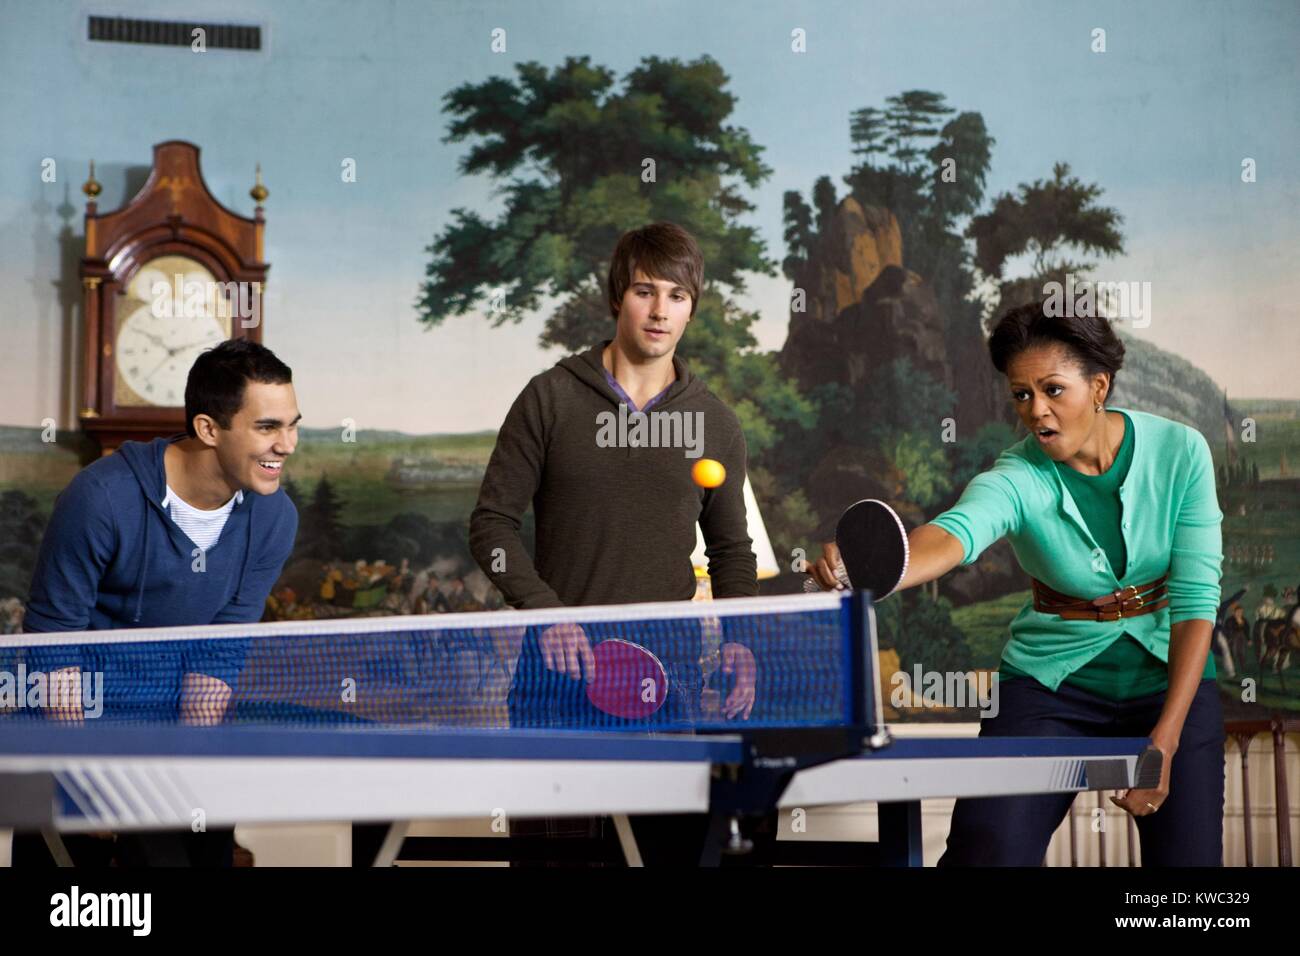 'Big Time Rush' band members and First Lady Michelle Obama play Table tennis at the White House. They were in the Diplomatic Reception Room taping for Nickelodeon's Worldwide Day of Play, Sept. 24, 2011. (BSLOC 2015 13 183) Stock Photo